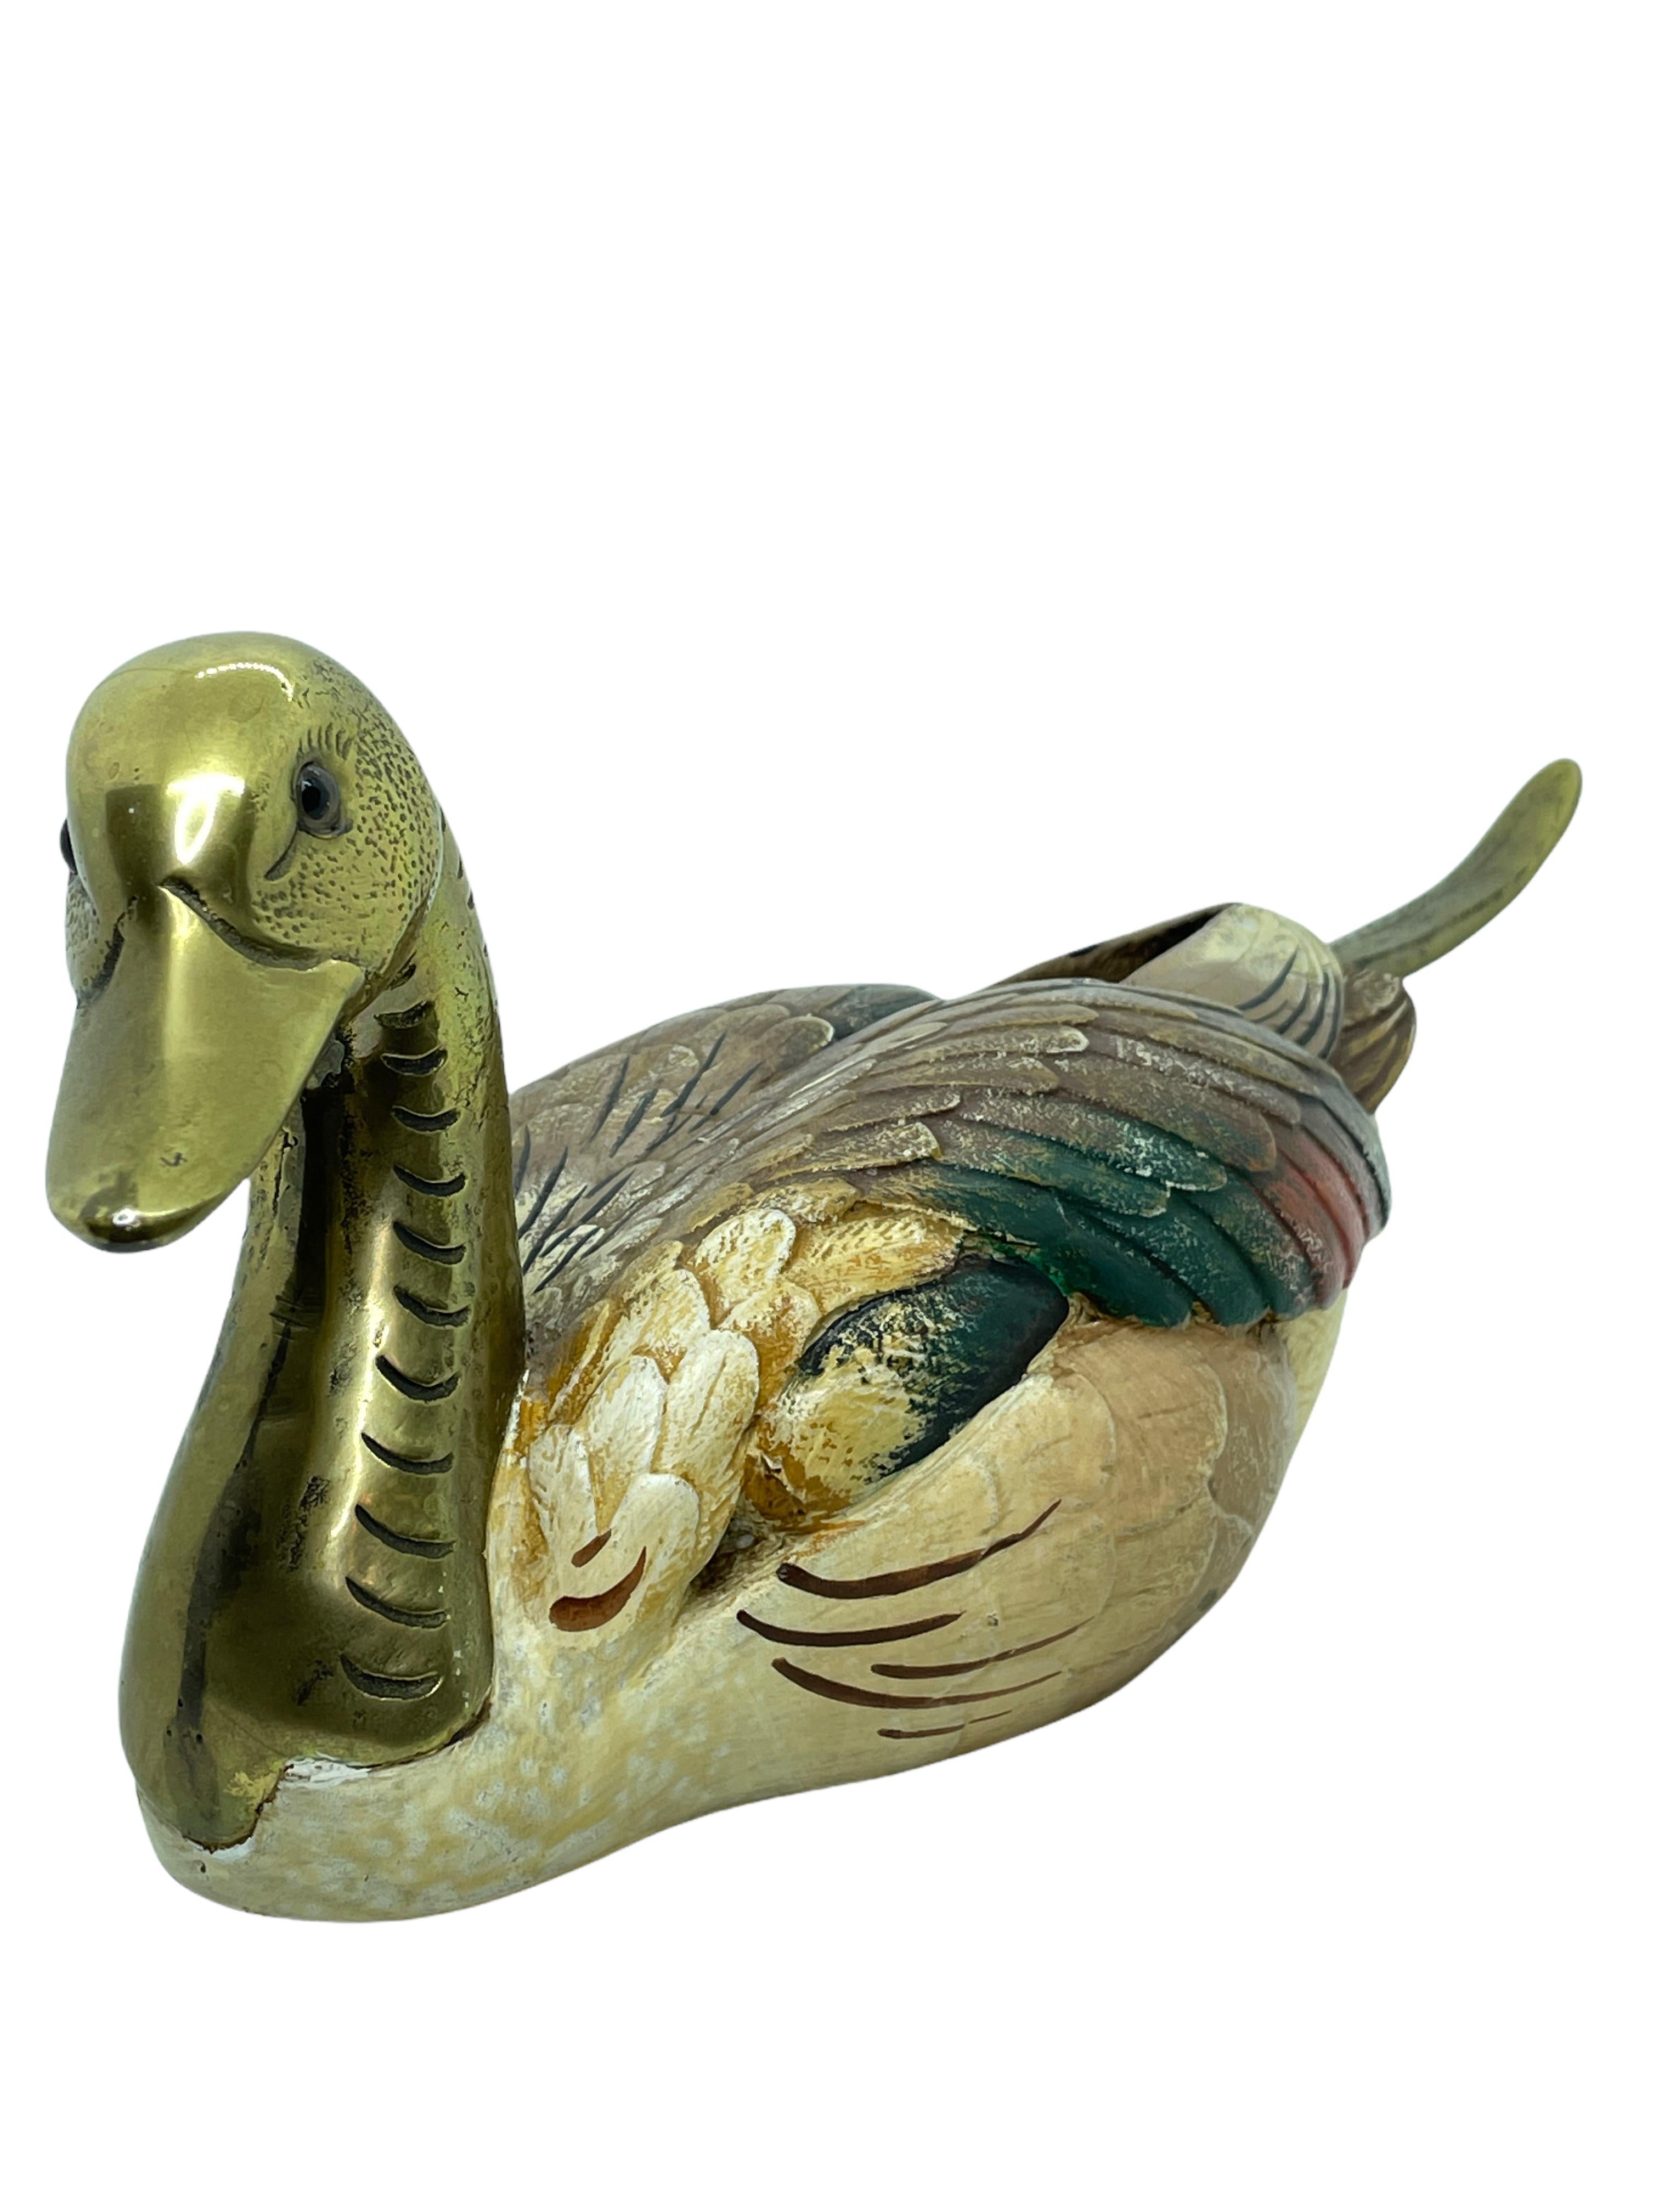 Hand-Painted Brass Accented Hand Painted Duck Decoy Figurine Statue, 1980s Malevolti Italy For Sale